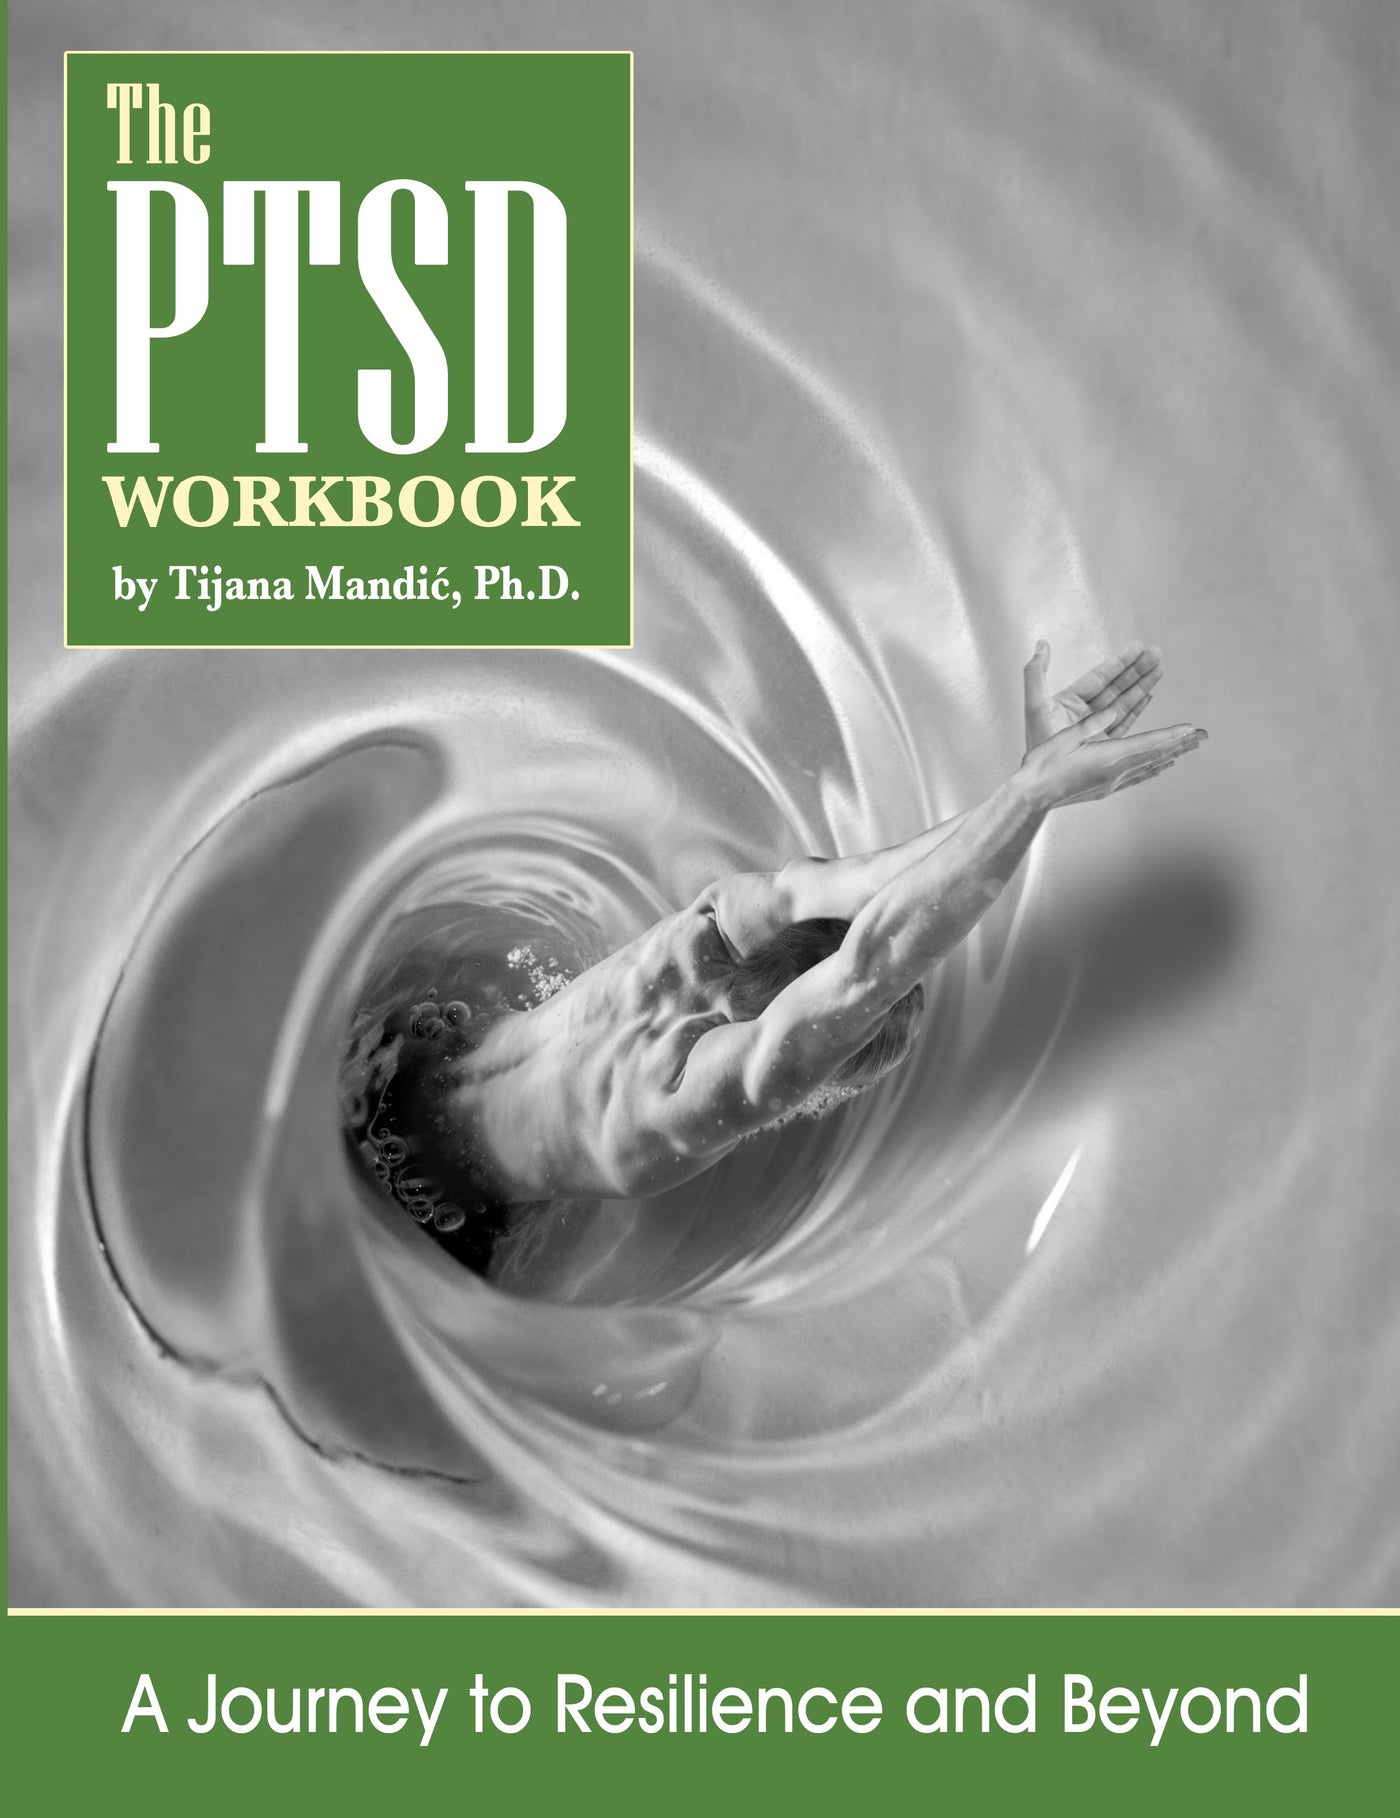 The PTSD Workbook: A Journey to Resilience and Beyond (PDF)